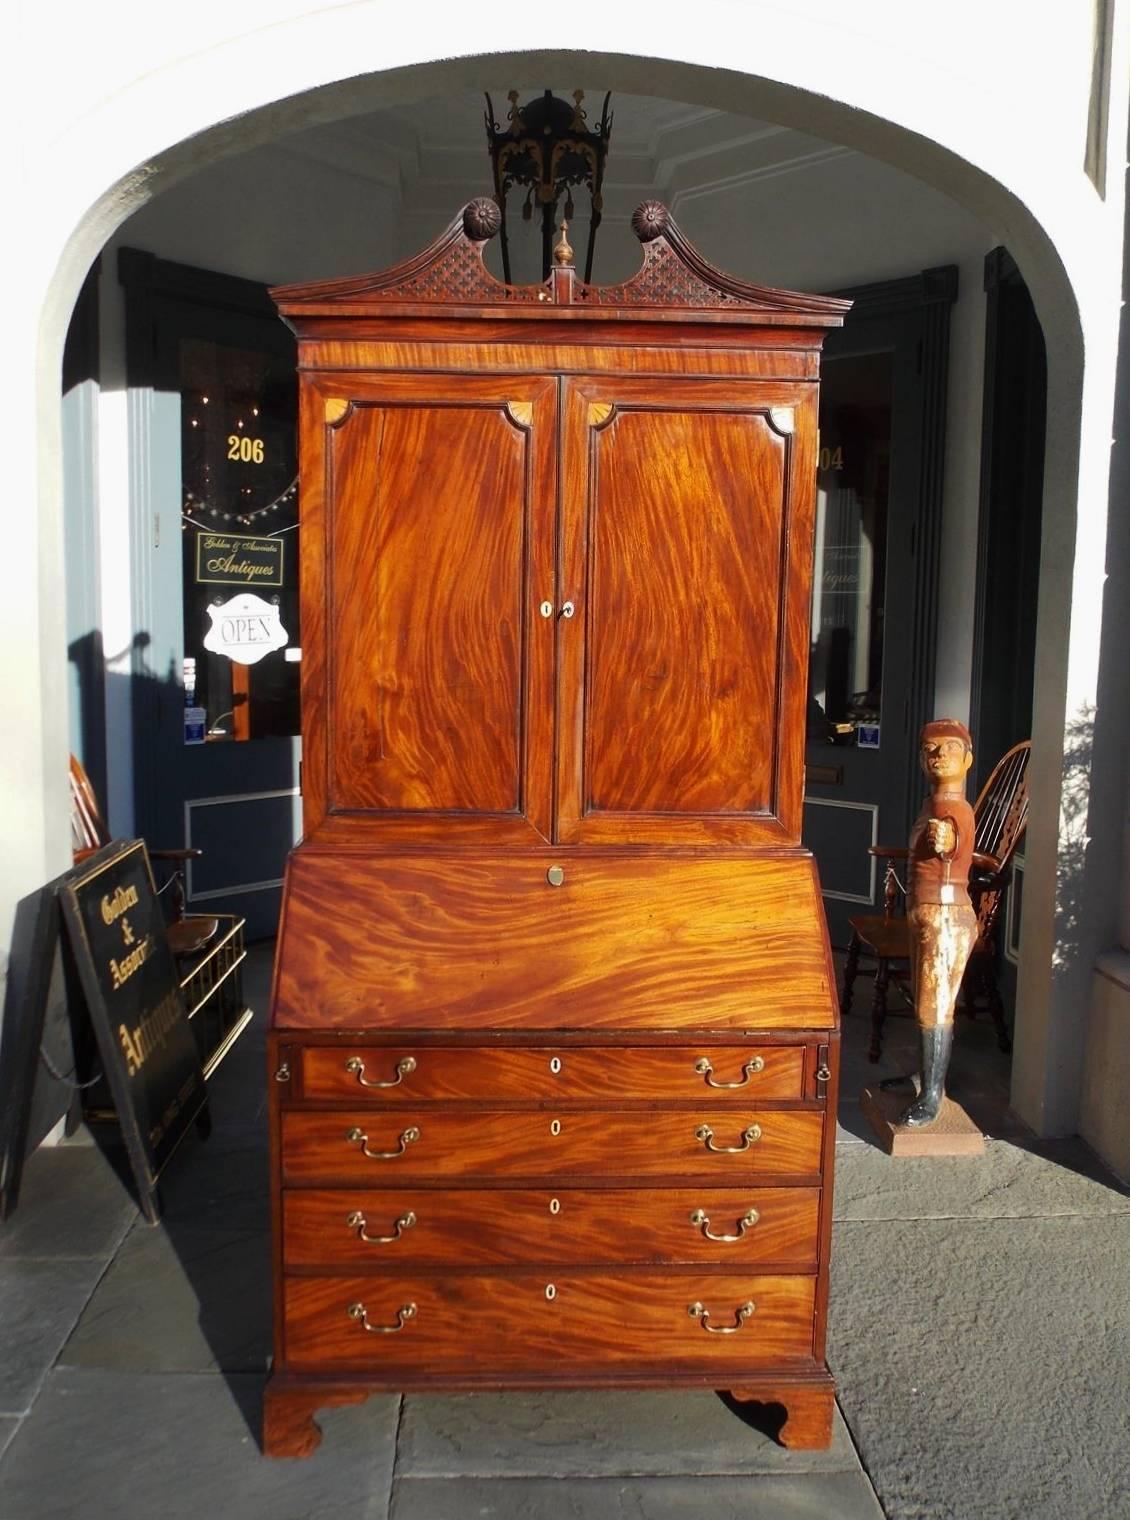 English mahogany secretary with bookcase. Upper case has a intricately carved broken pediment with floral medallions and centered urn, patera satinwood inlaid blind doors, with upper case interior adjustable shelves. The lower case has a slant front